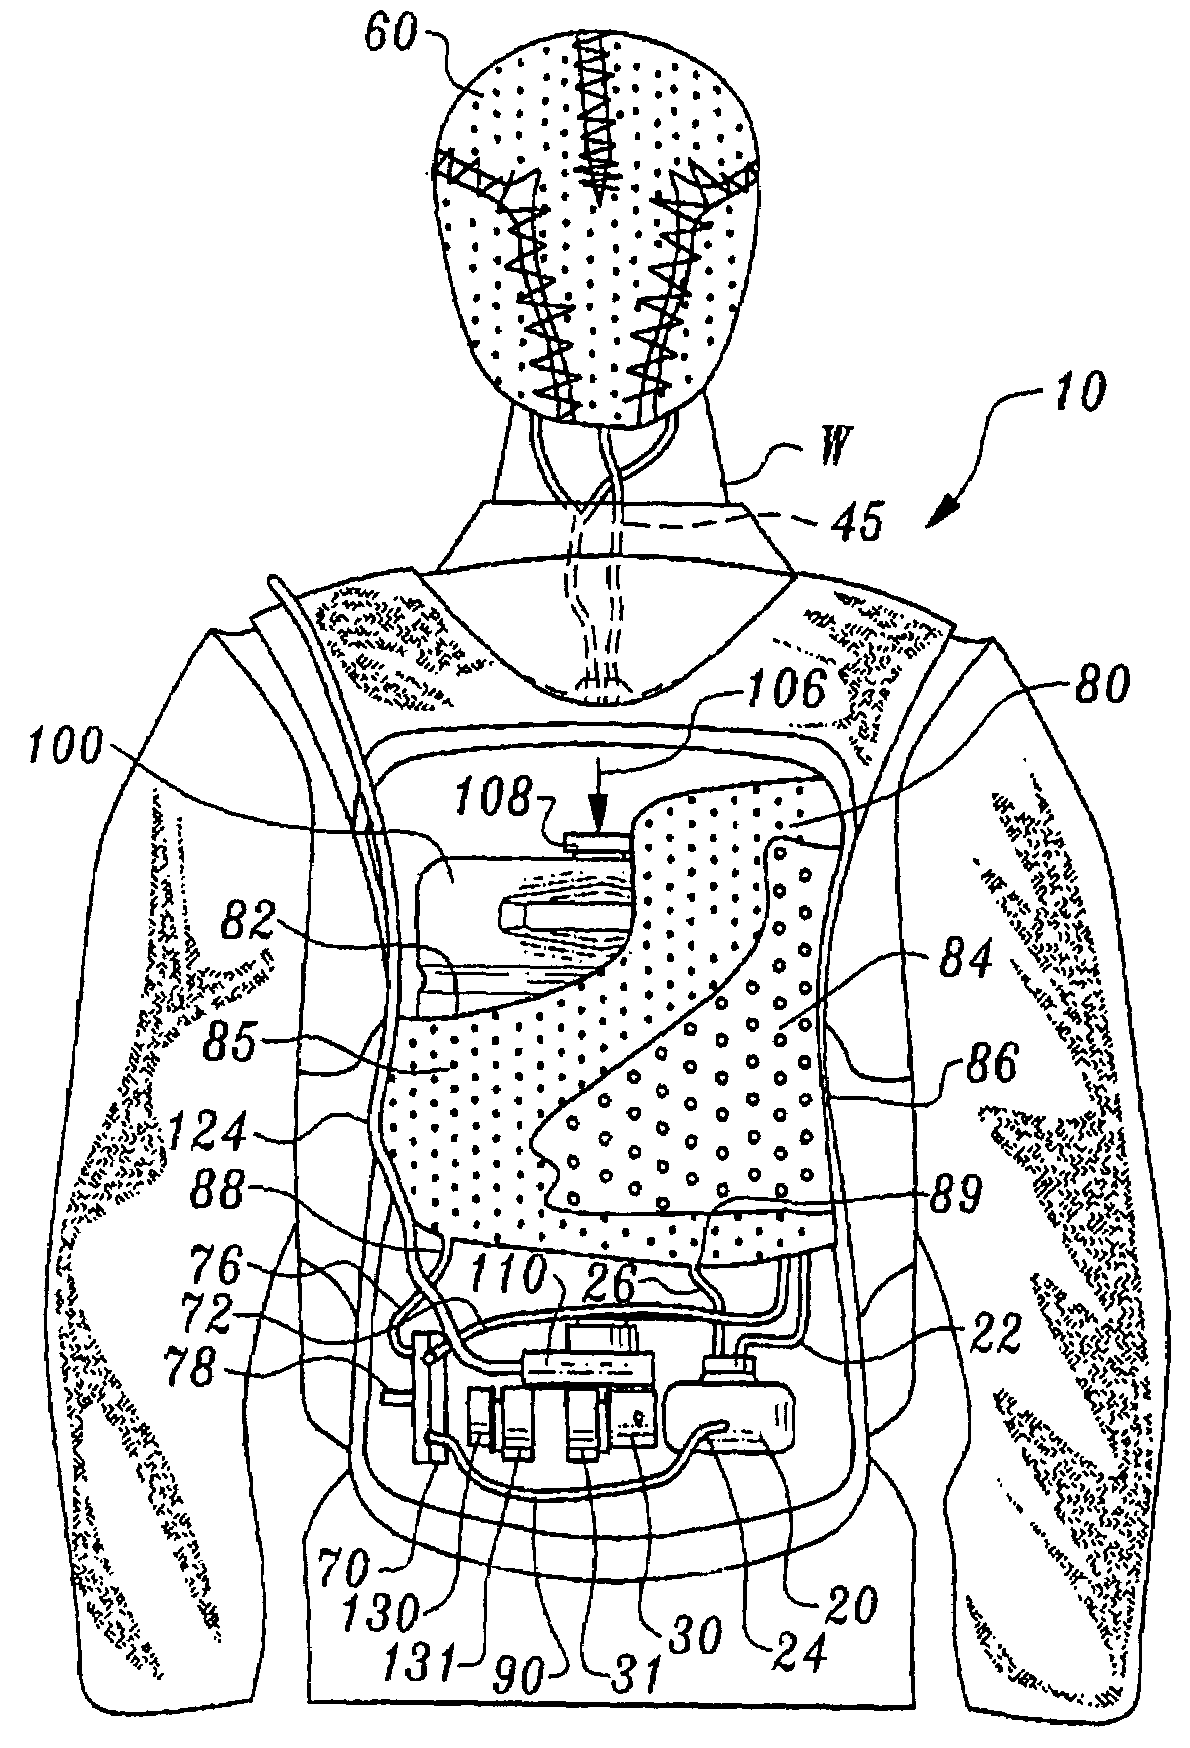 Wearable personal cooling and hydration system